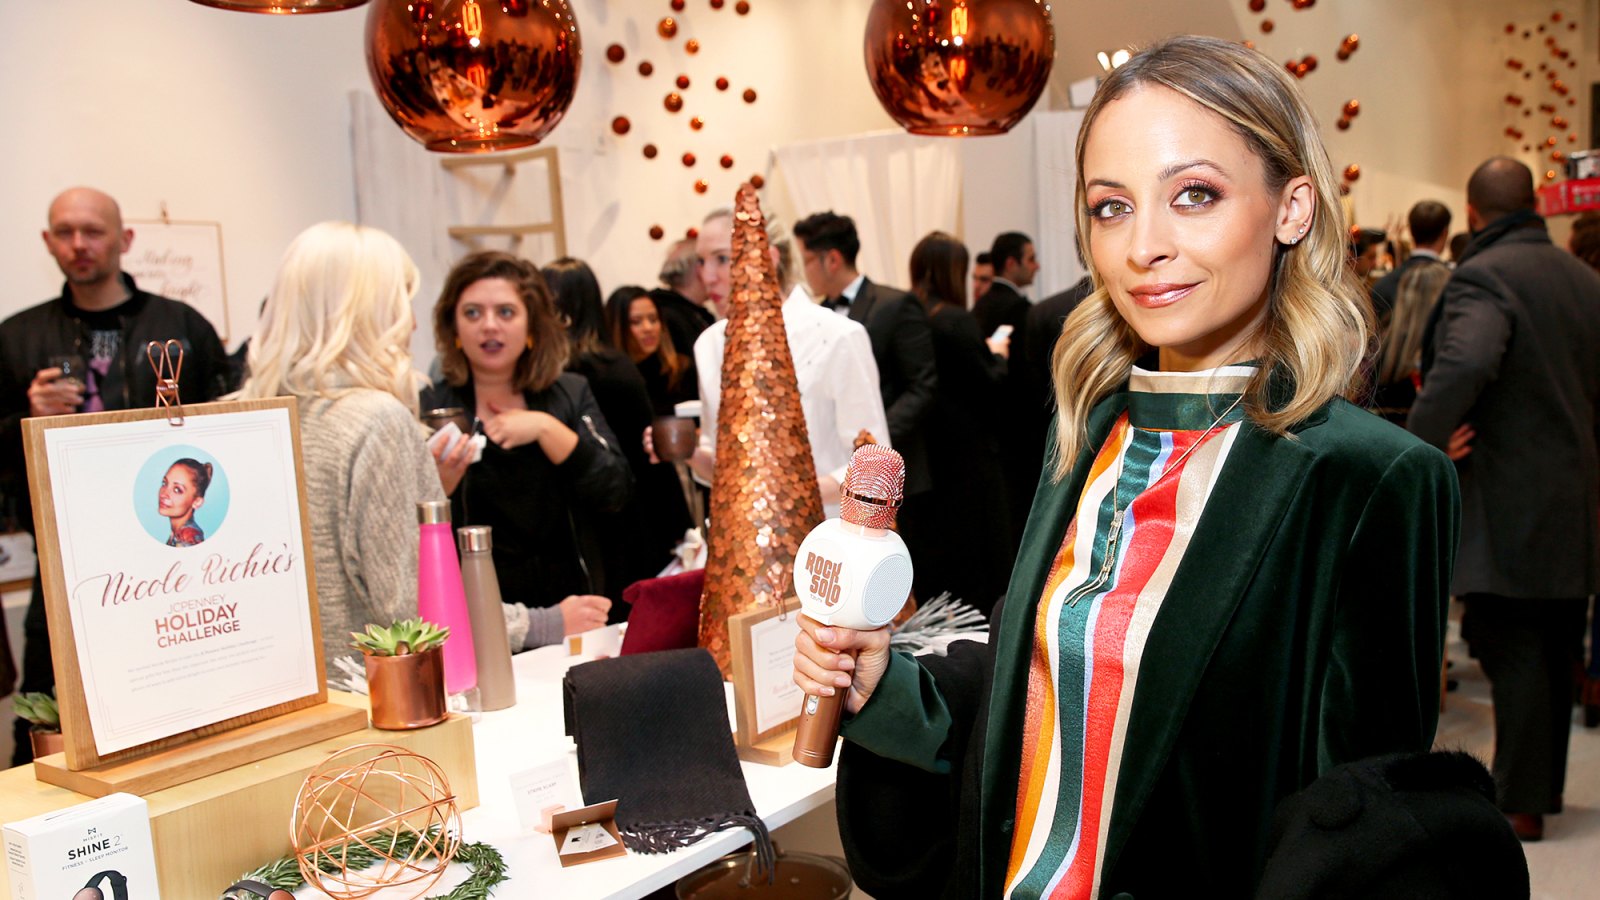 Nicole Richie attends the opening of Jacques Penne, a JCPenney holiday boutique pop-up shop celebration on December 7, 2017 in New York City.